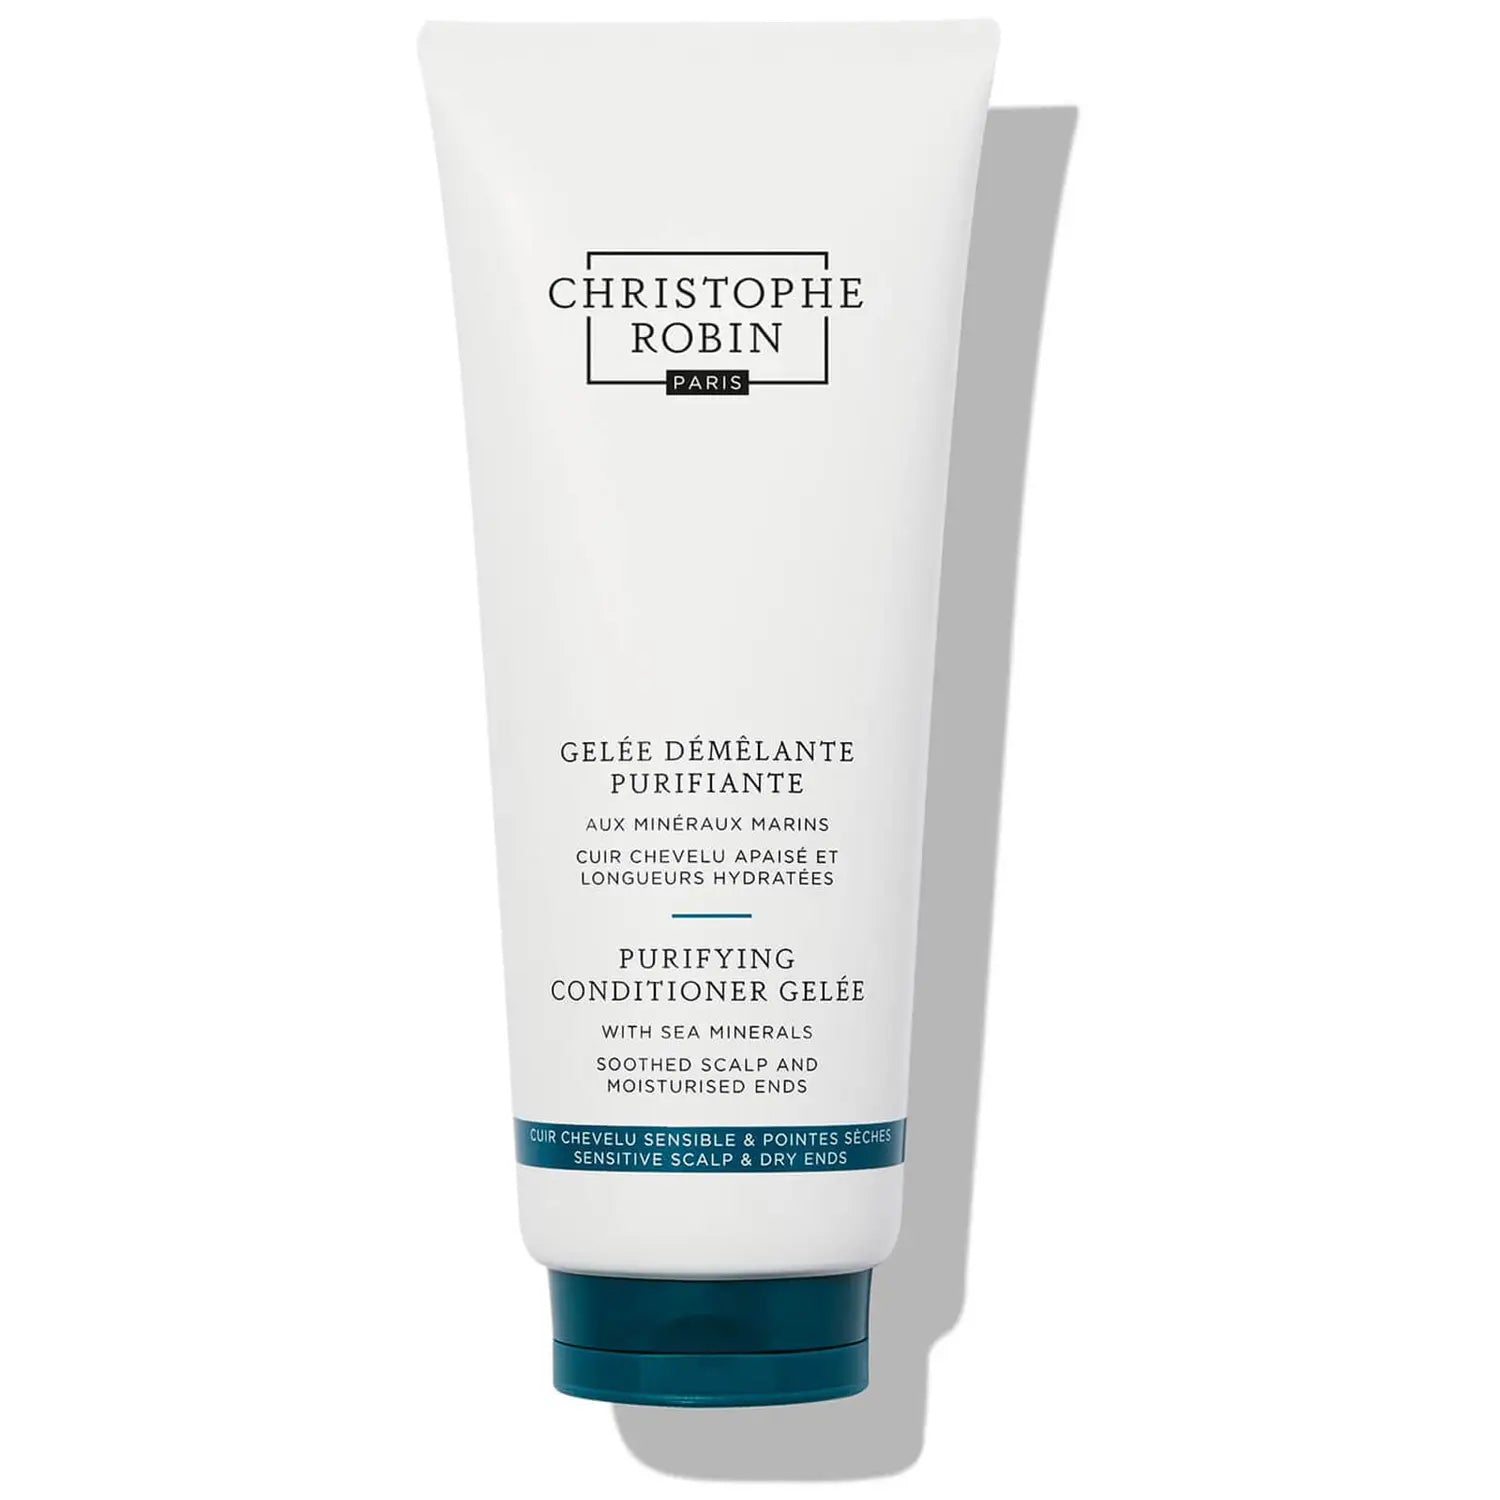 Luxury_haircare_christoph_robin_Purifying_conditioner_gelee_with_sea_minerals